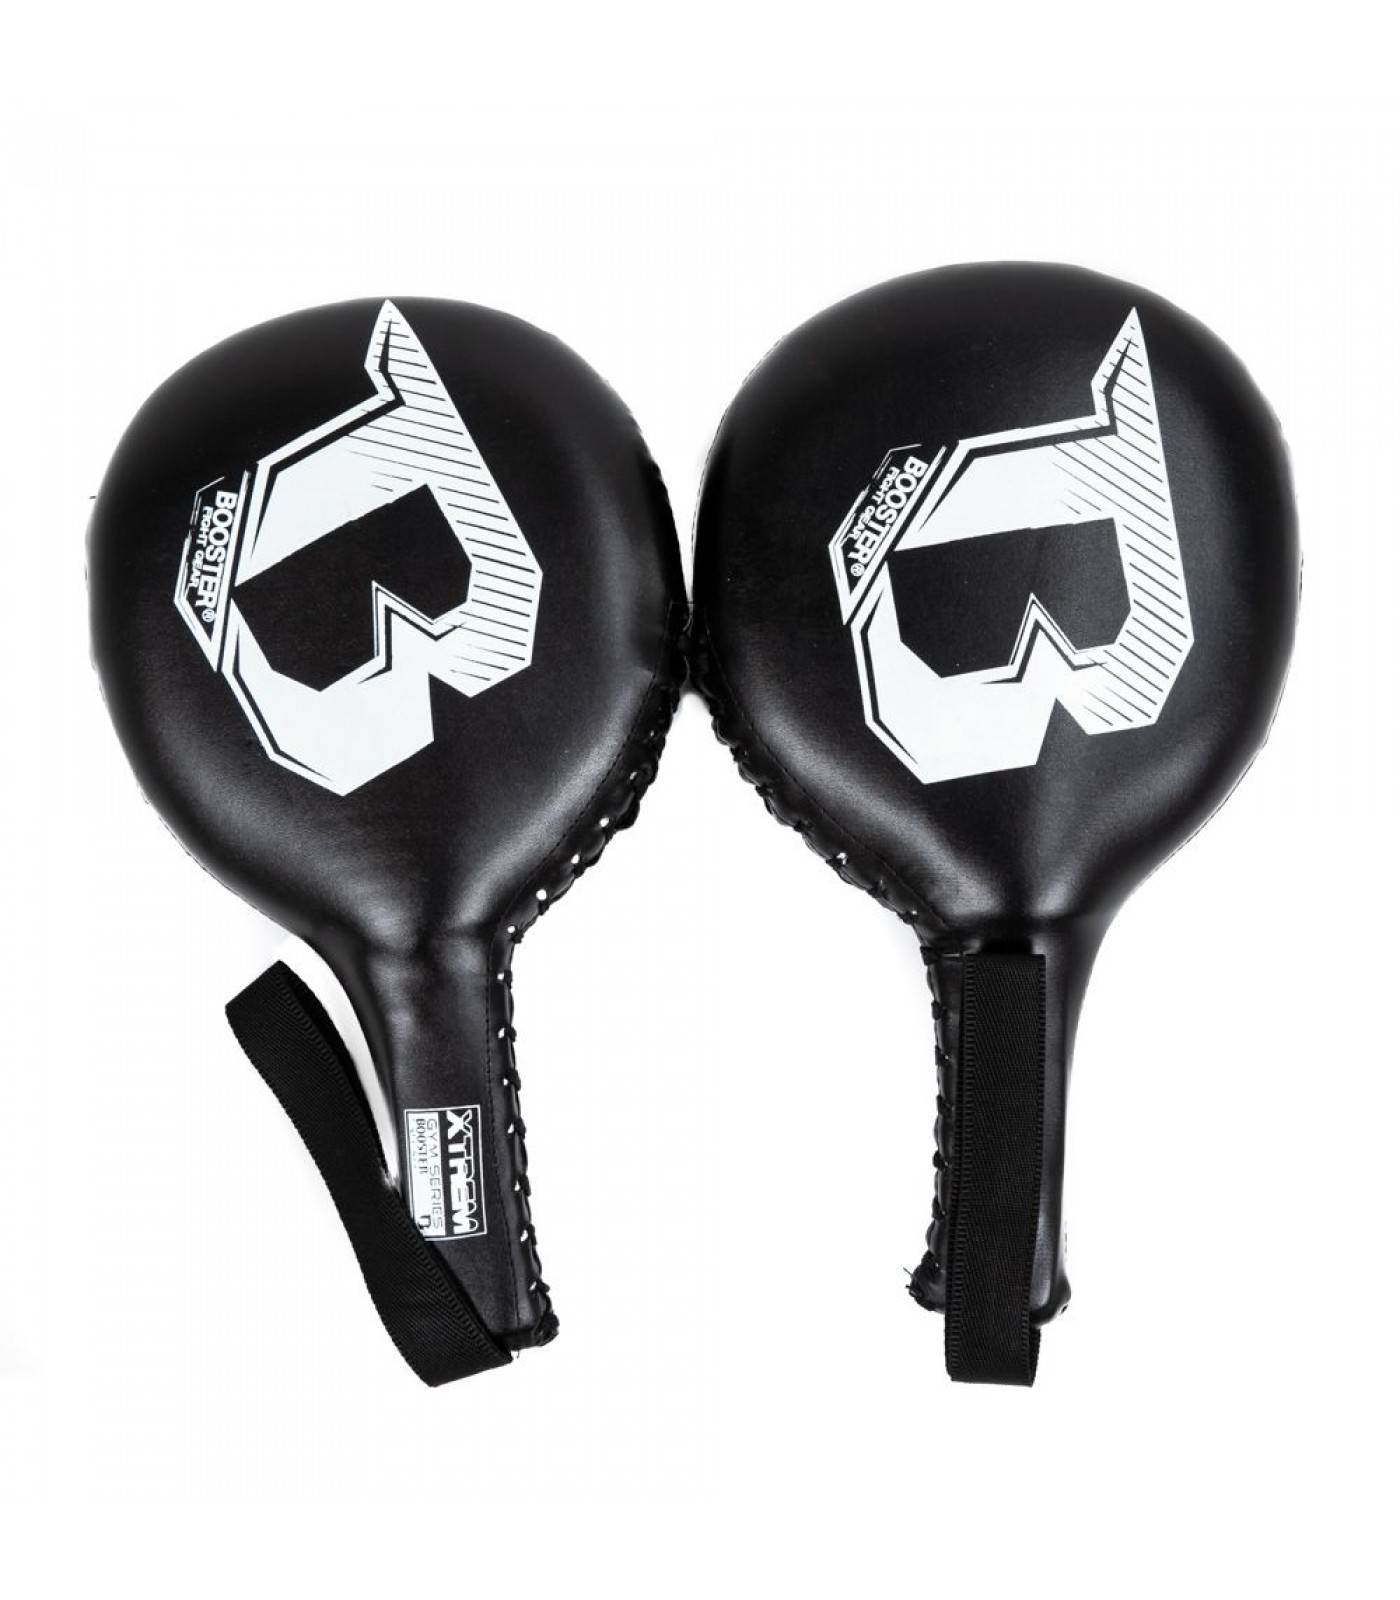 Педели за бокс - Booster - Boxing paddles-synthetic leather / Xtrem F4